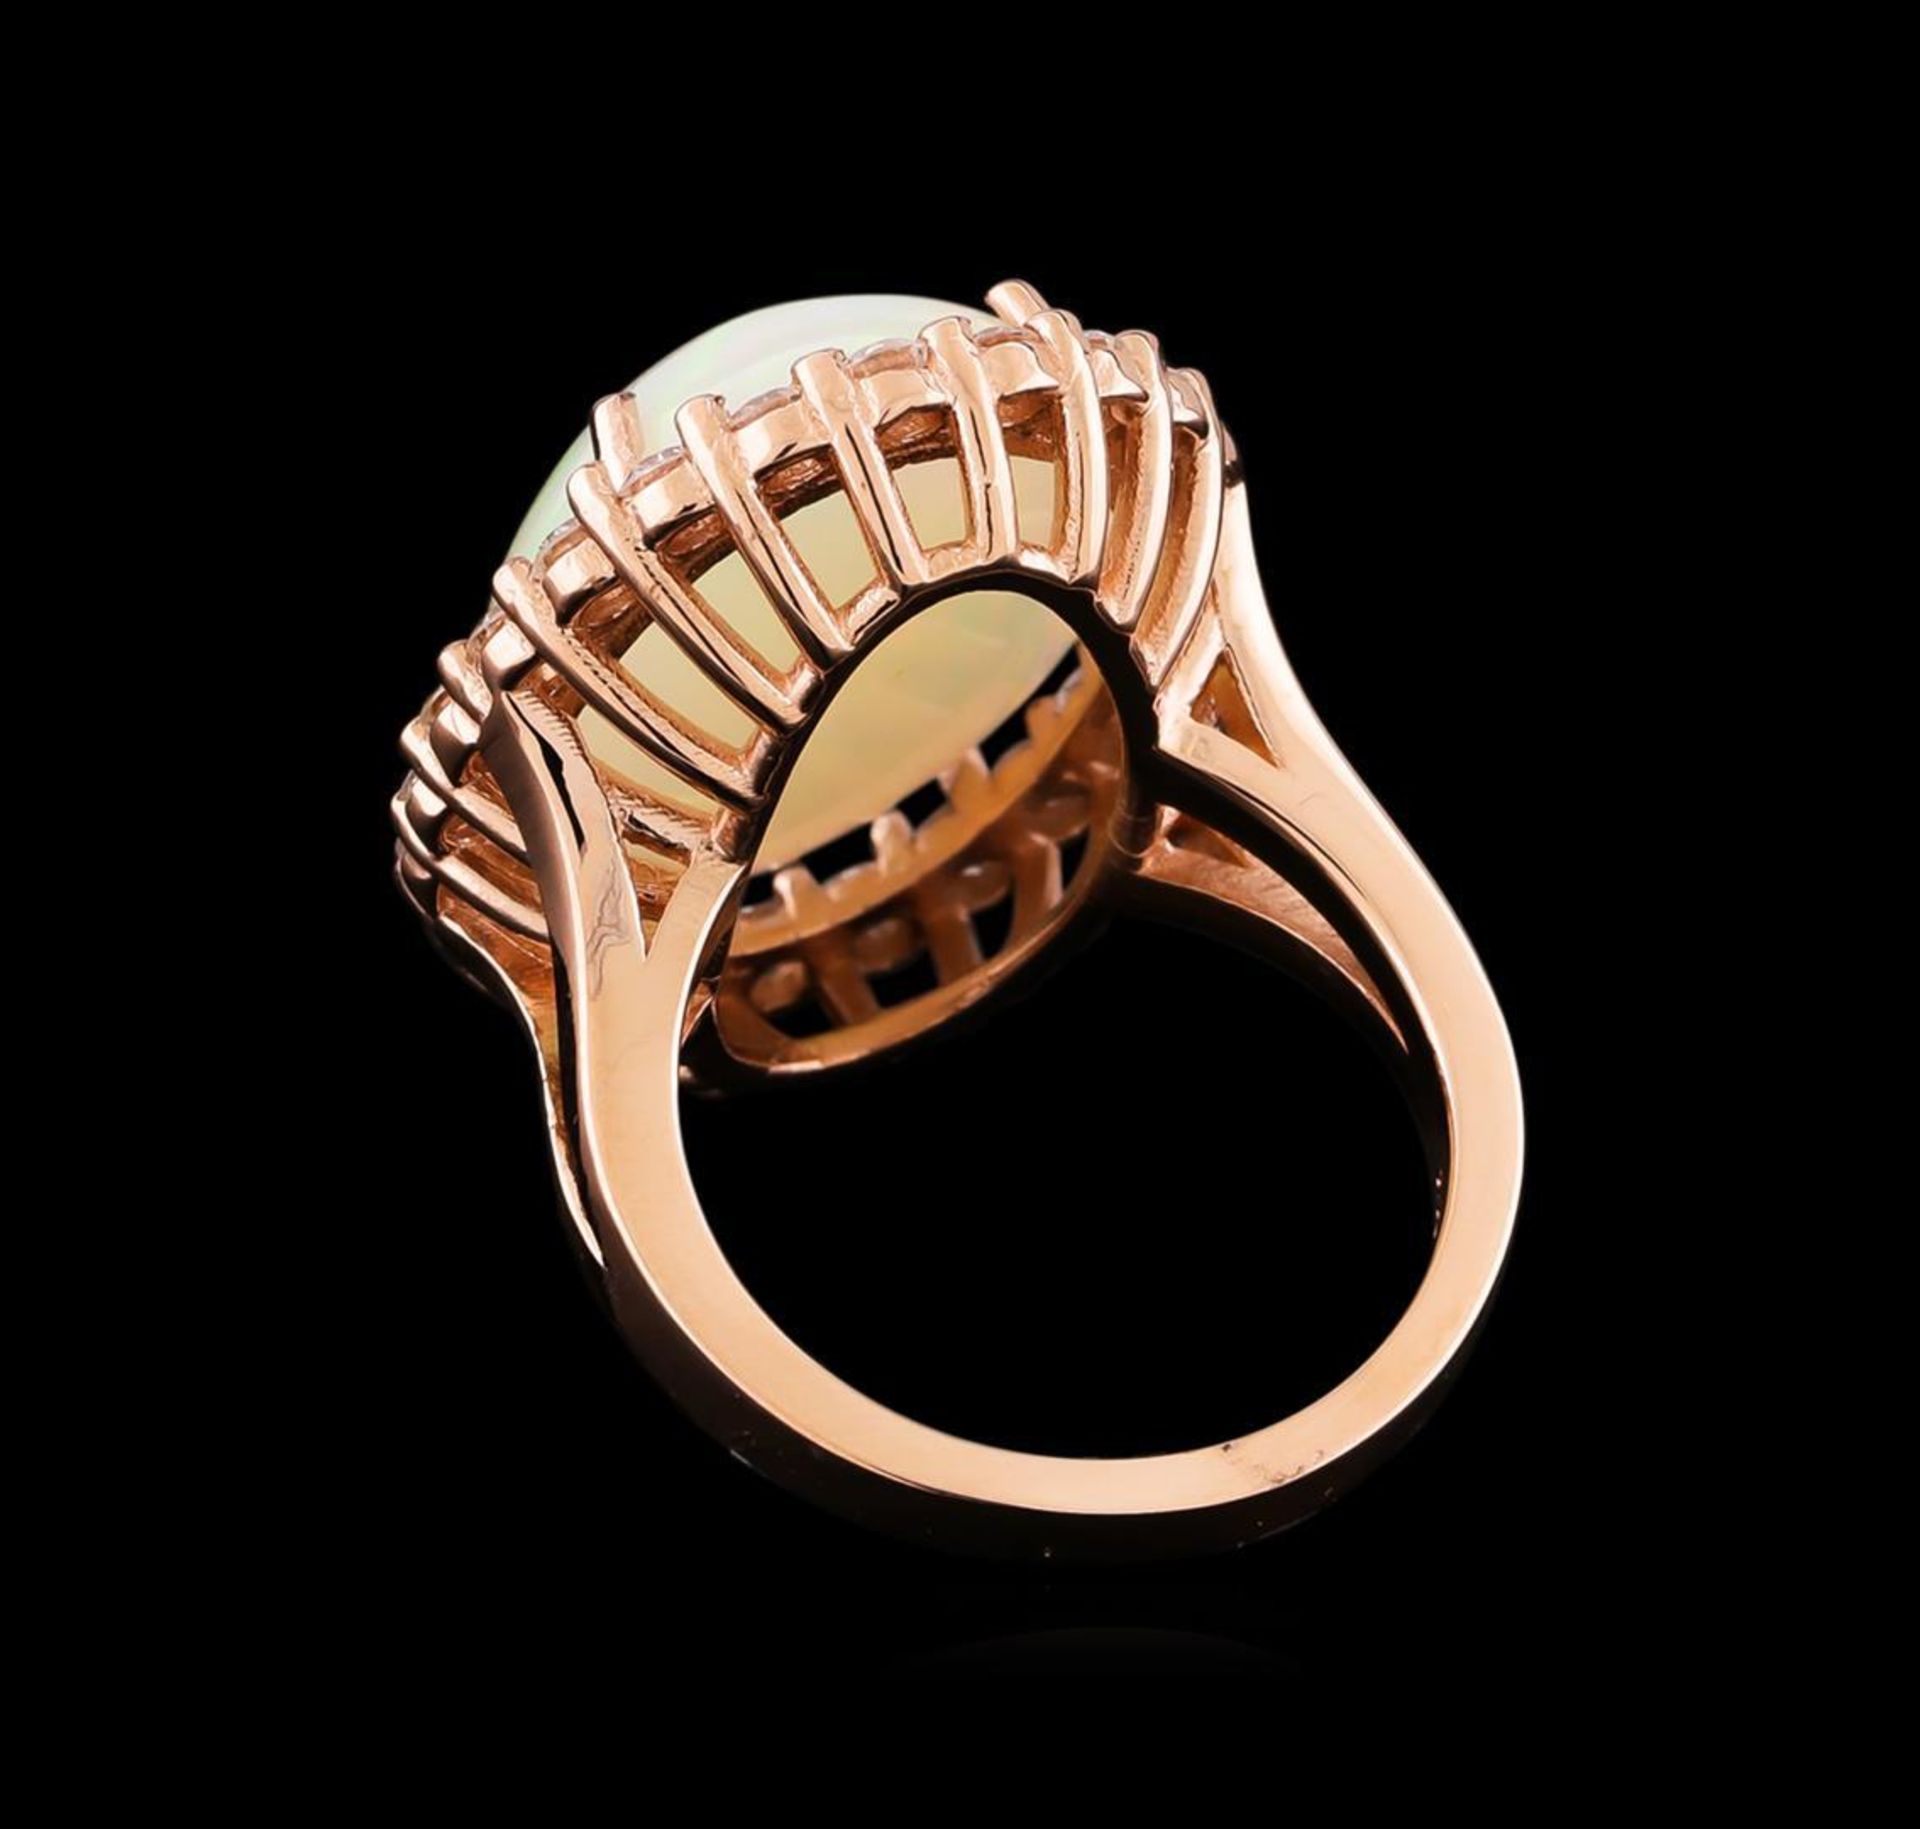 10.00 ctw Opal and Diamond Ring - 14KT Rose Gold - Image 3 of 5